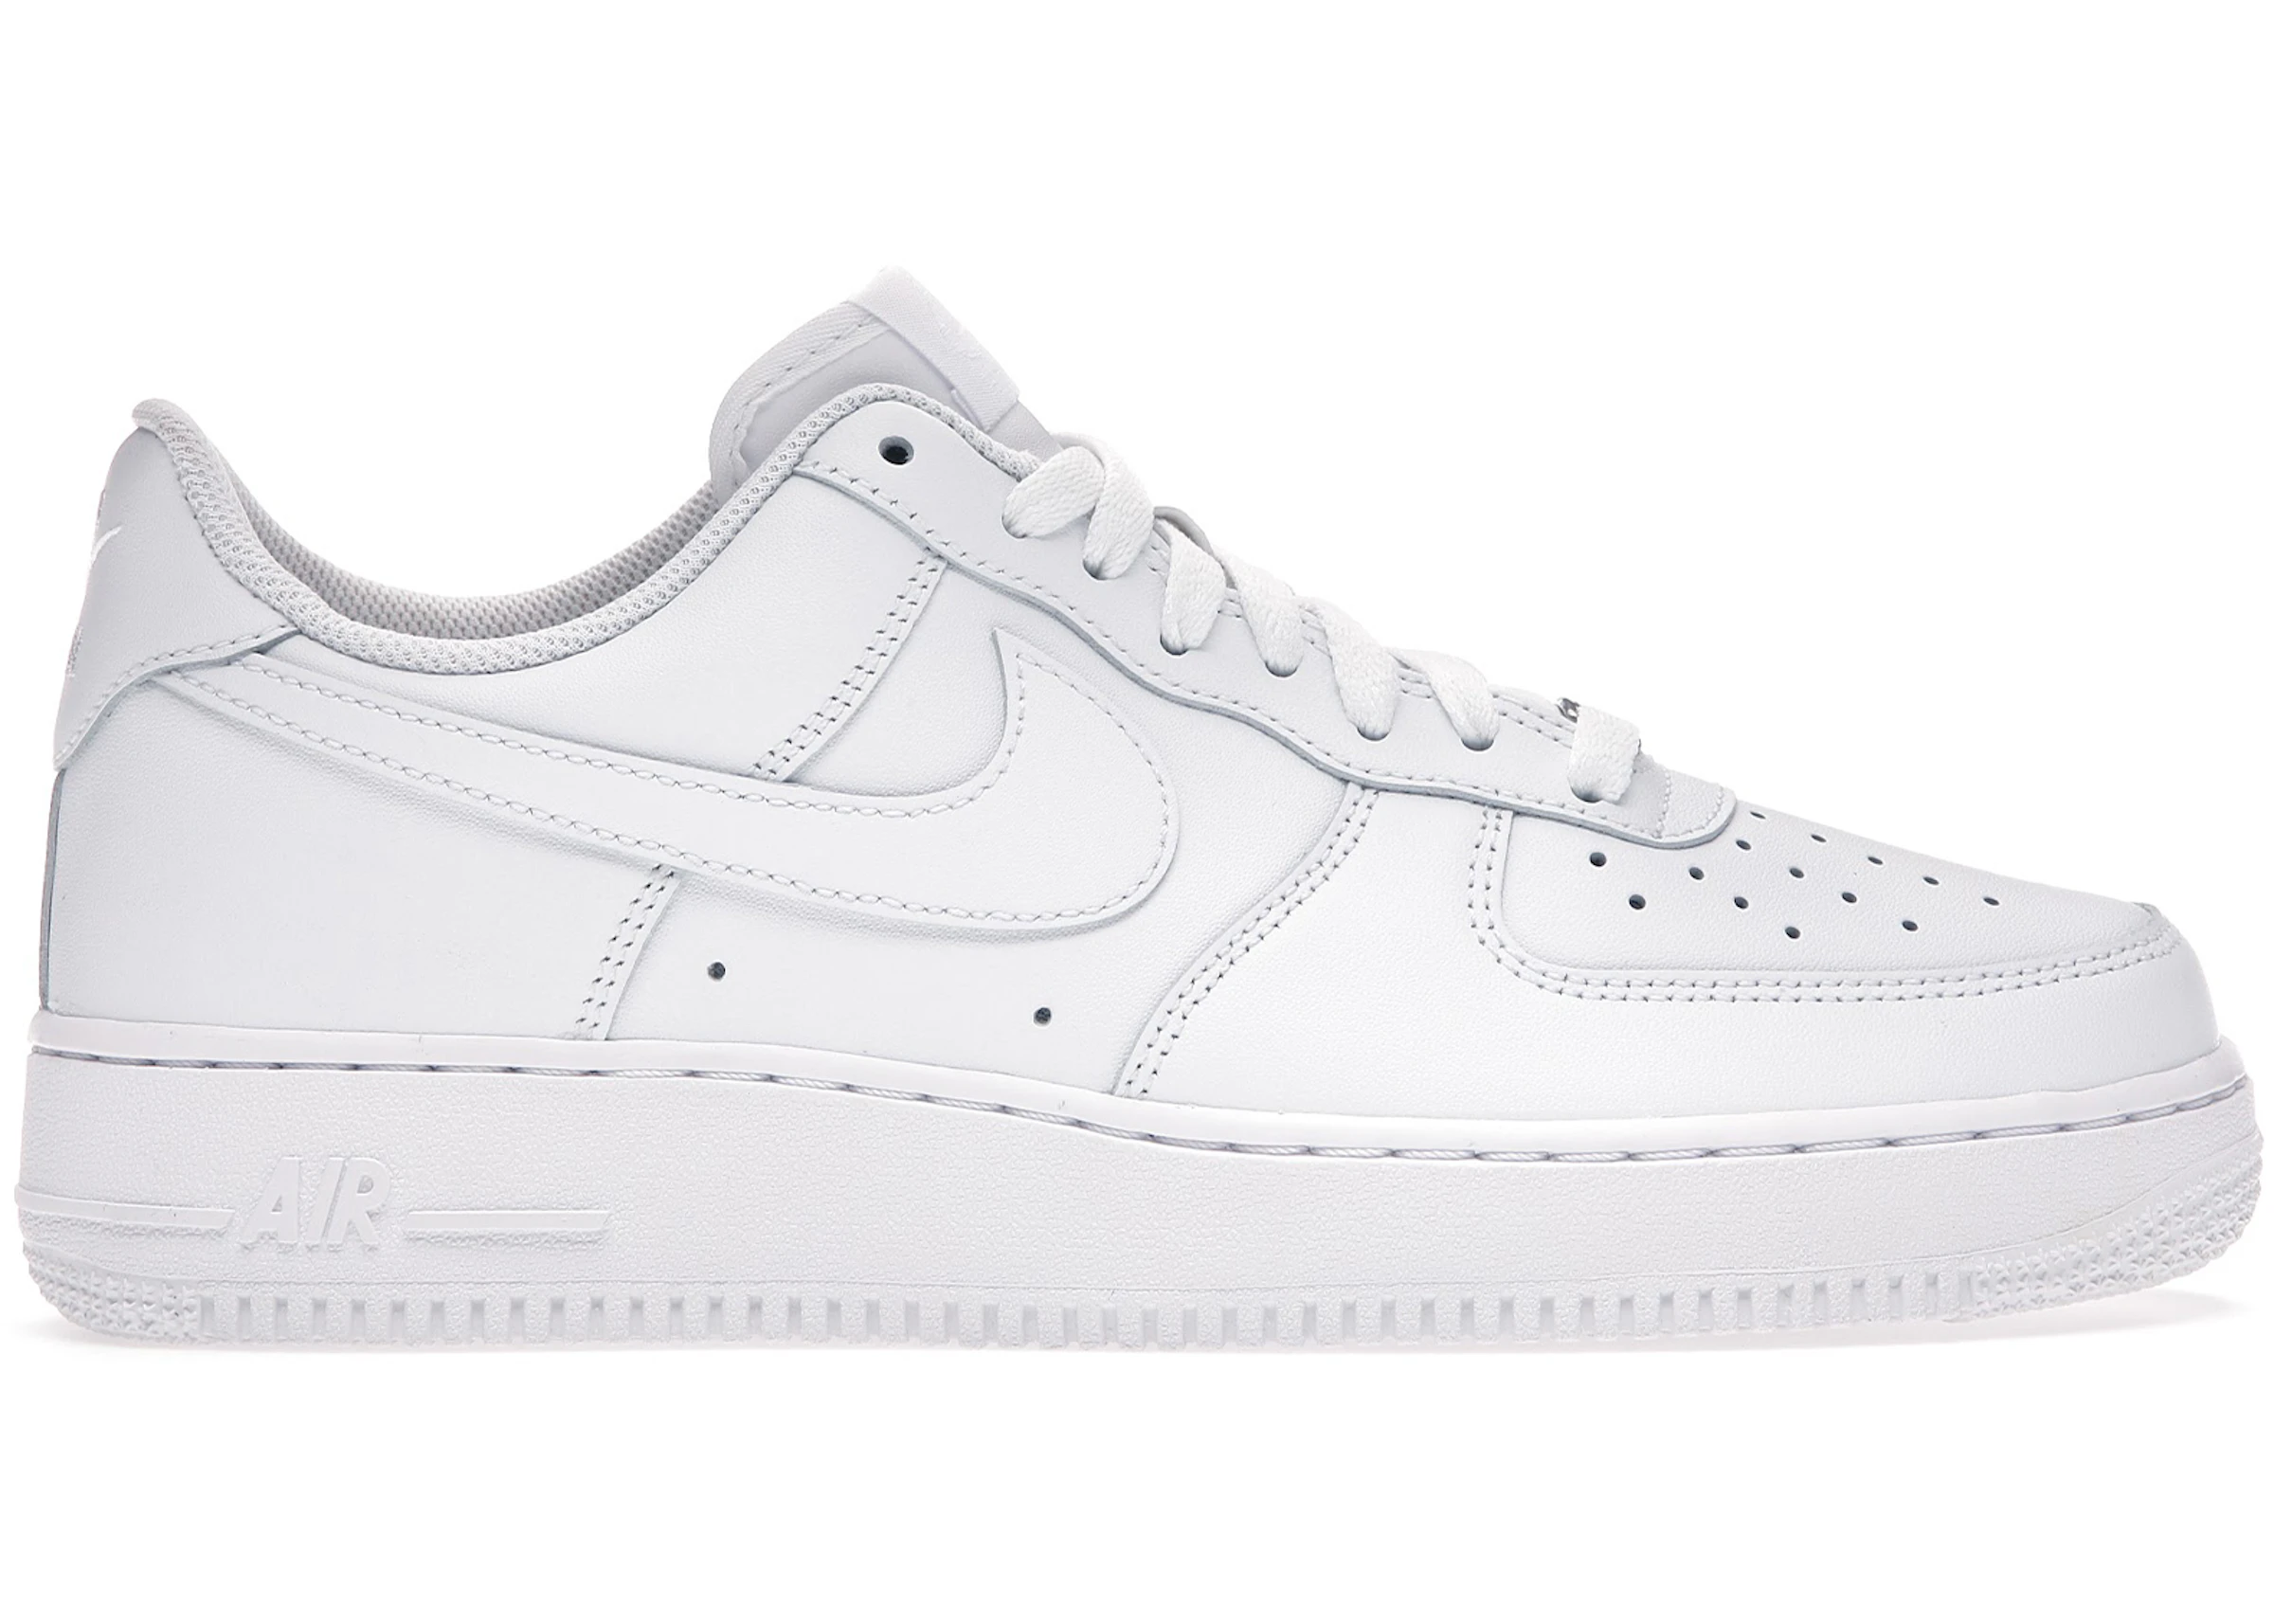 react Incubus Equipment Buy Nike Air Force 1 - Low White